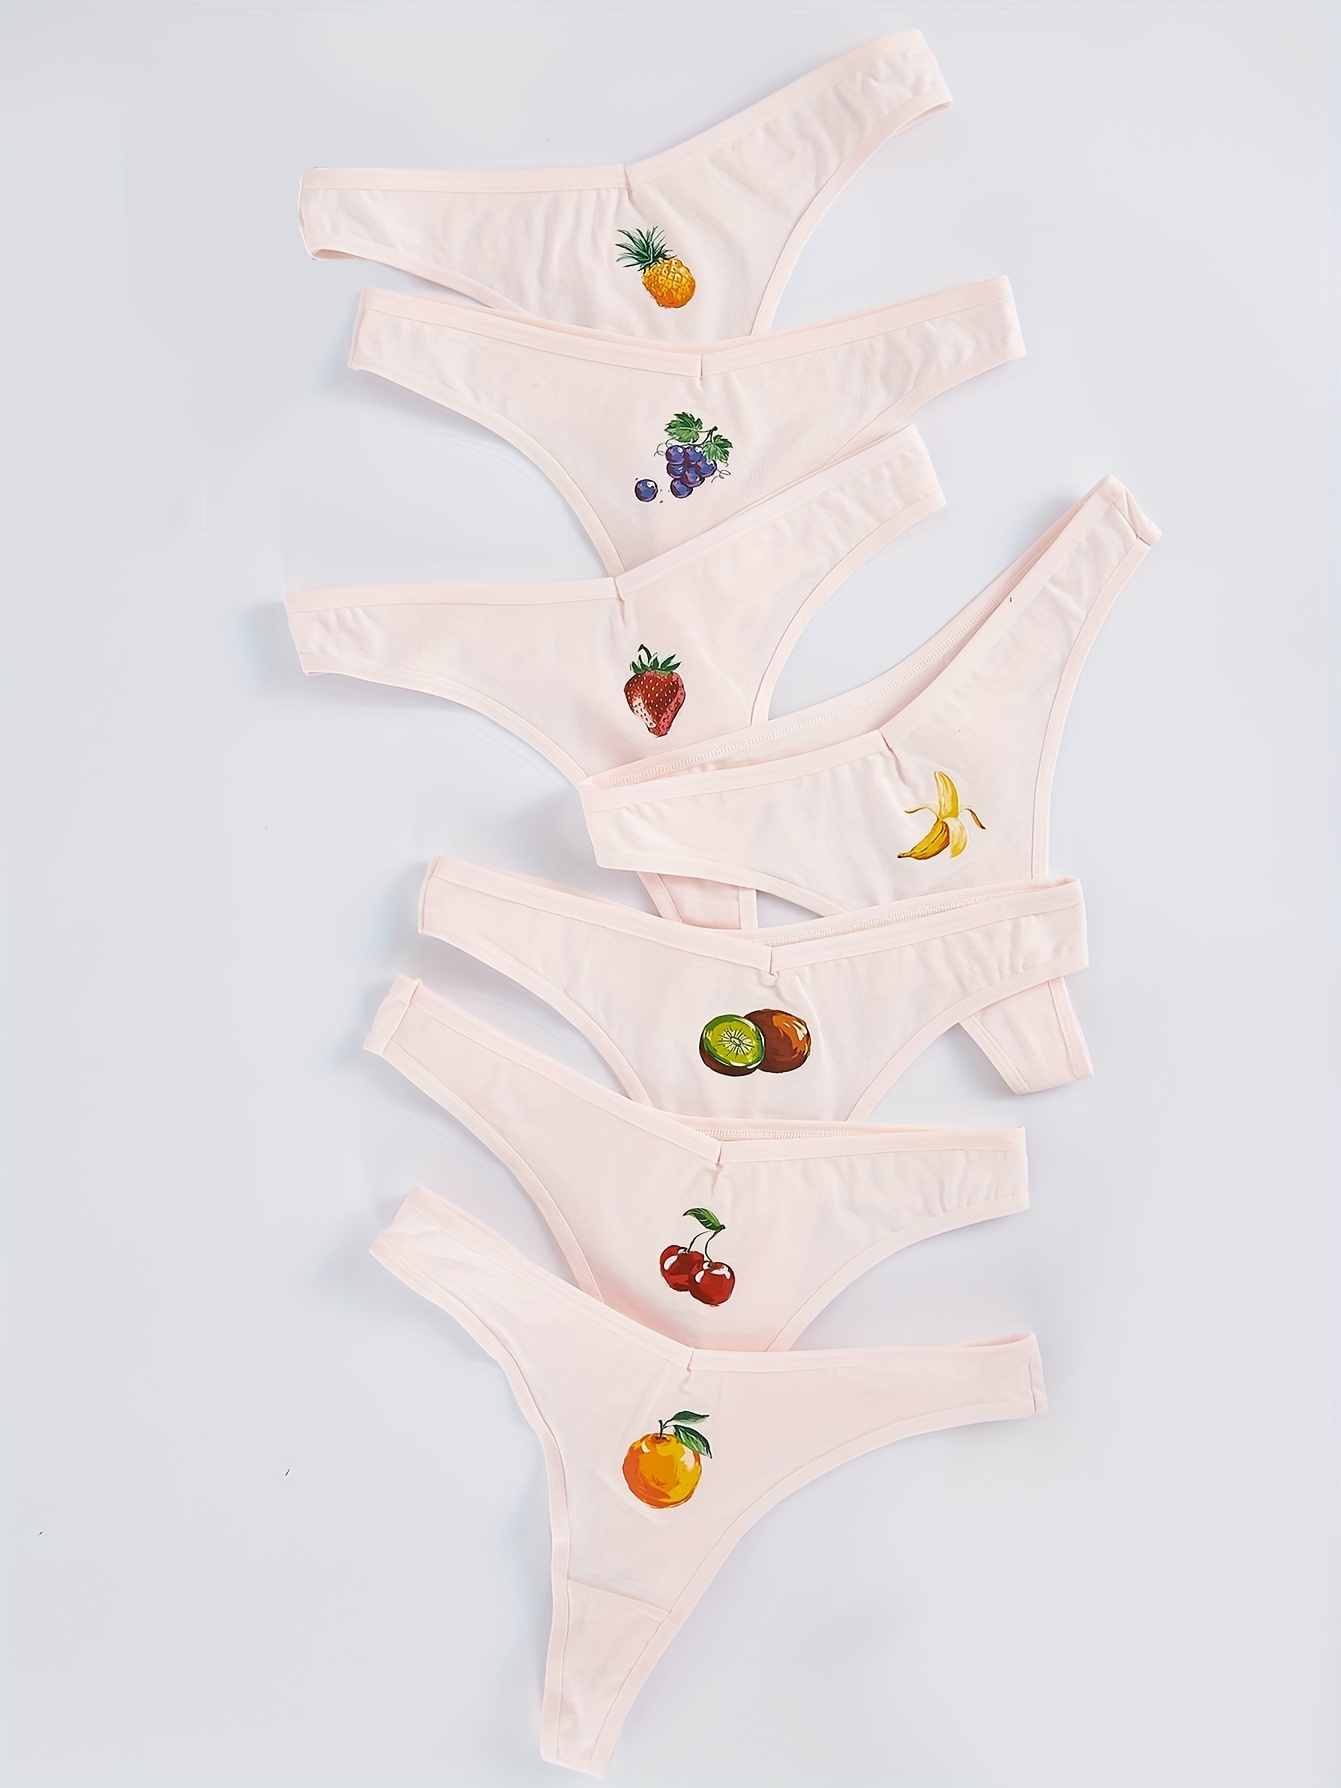  Fruit of the Loom Girls 6 Pack Assorted Cotton Briefs:  Clothing, Shoes & Jewelry